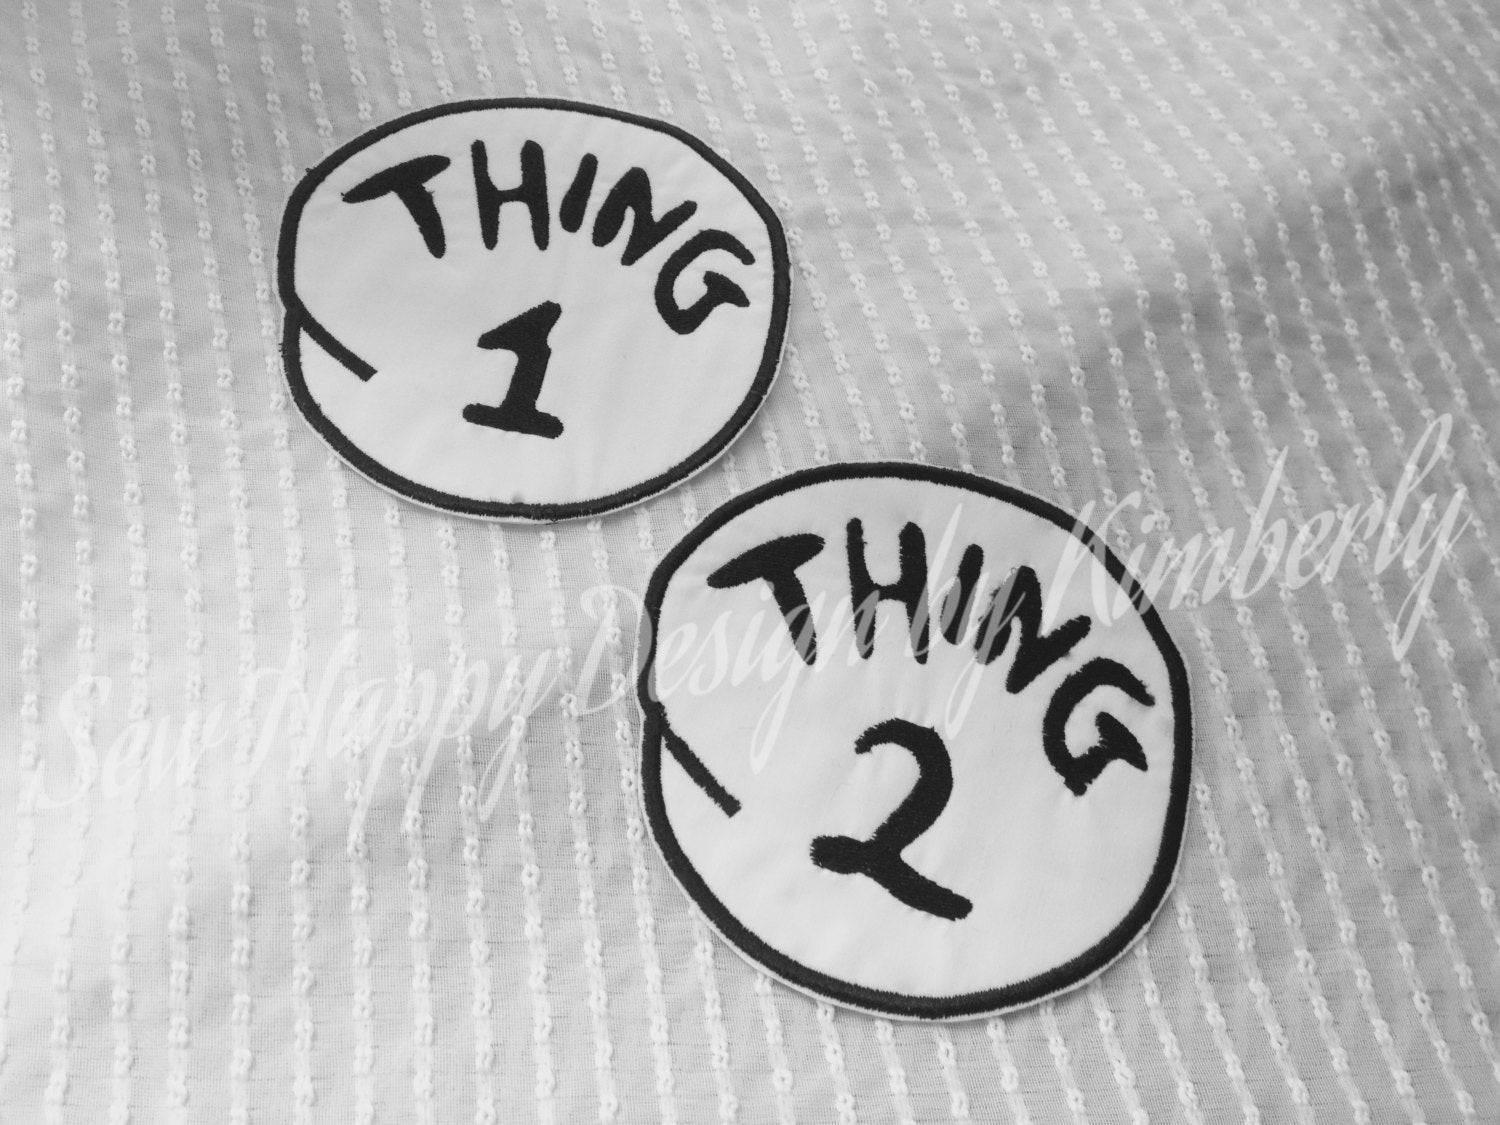 5 Thing 1 and Thing 2 Iron on